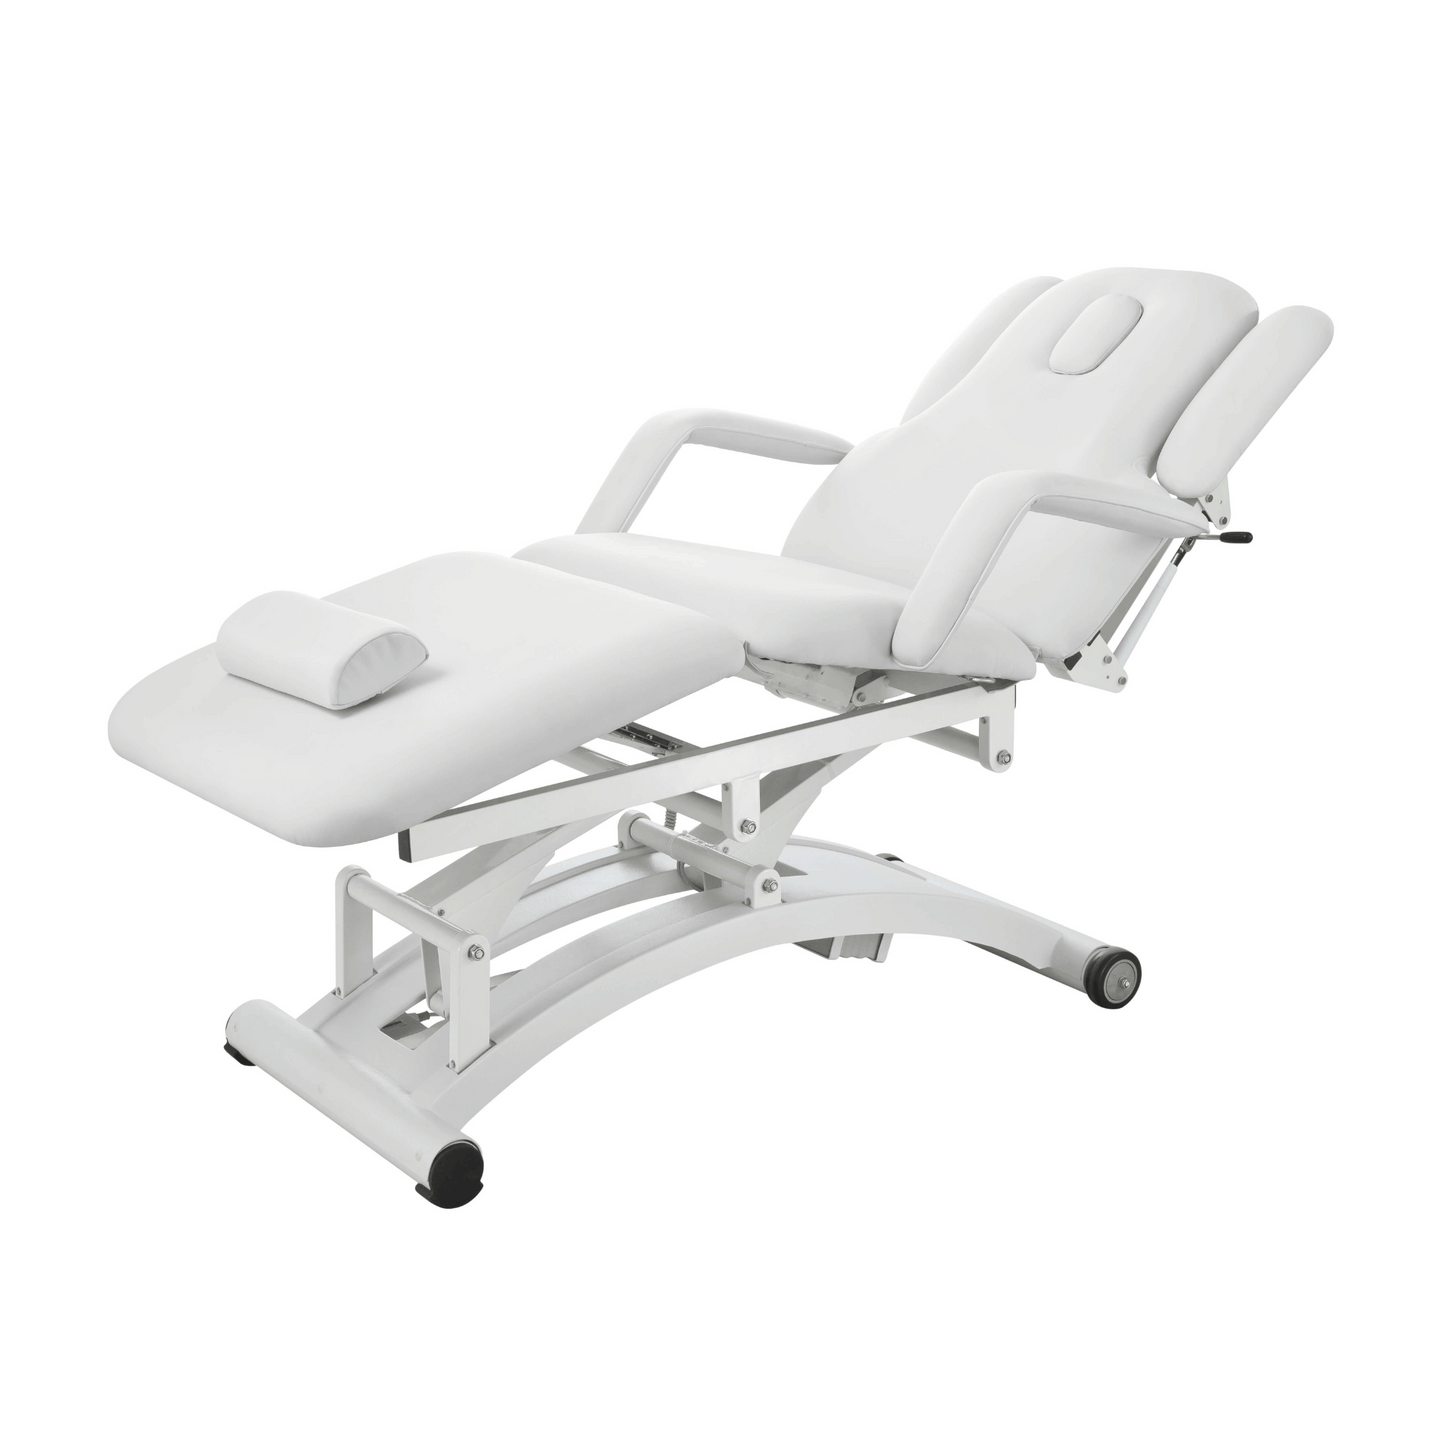 Harmon 3 Section Massage Bed White Color Image 4